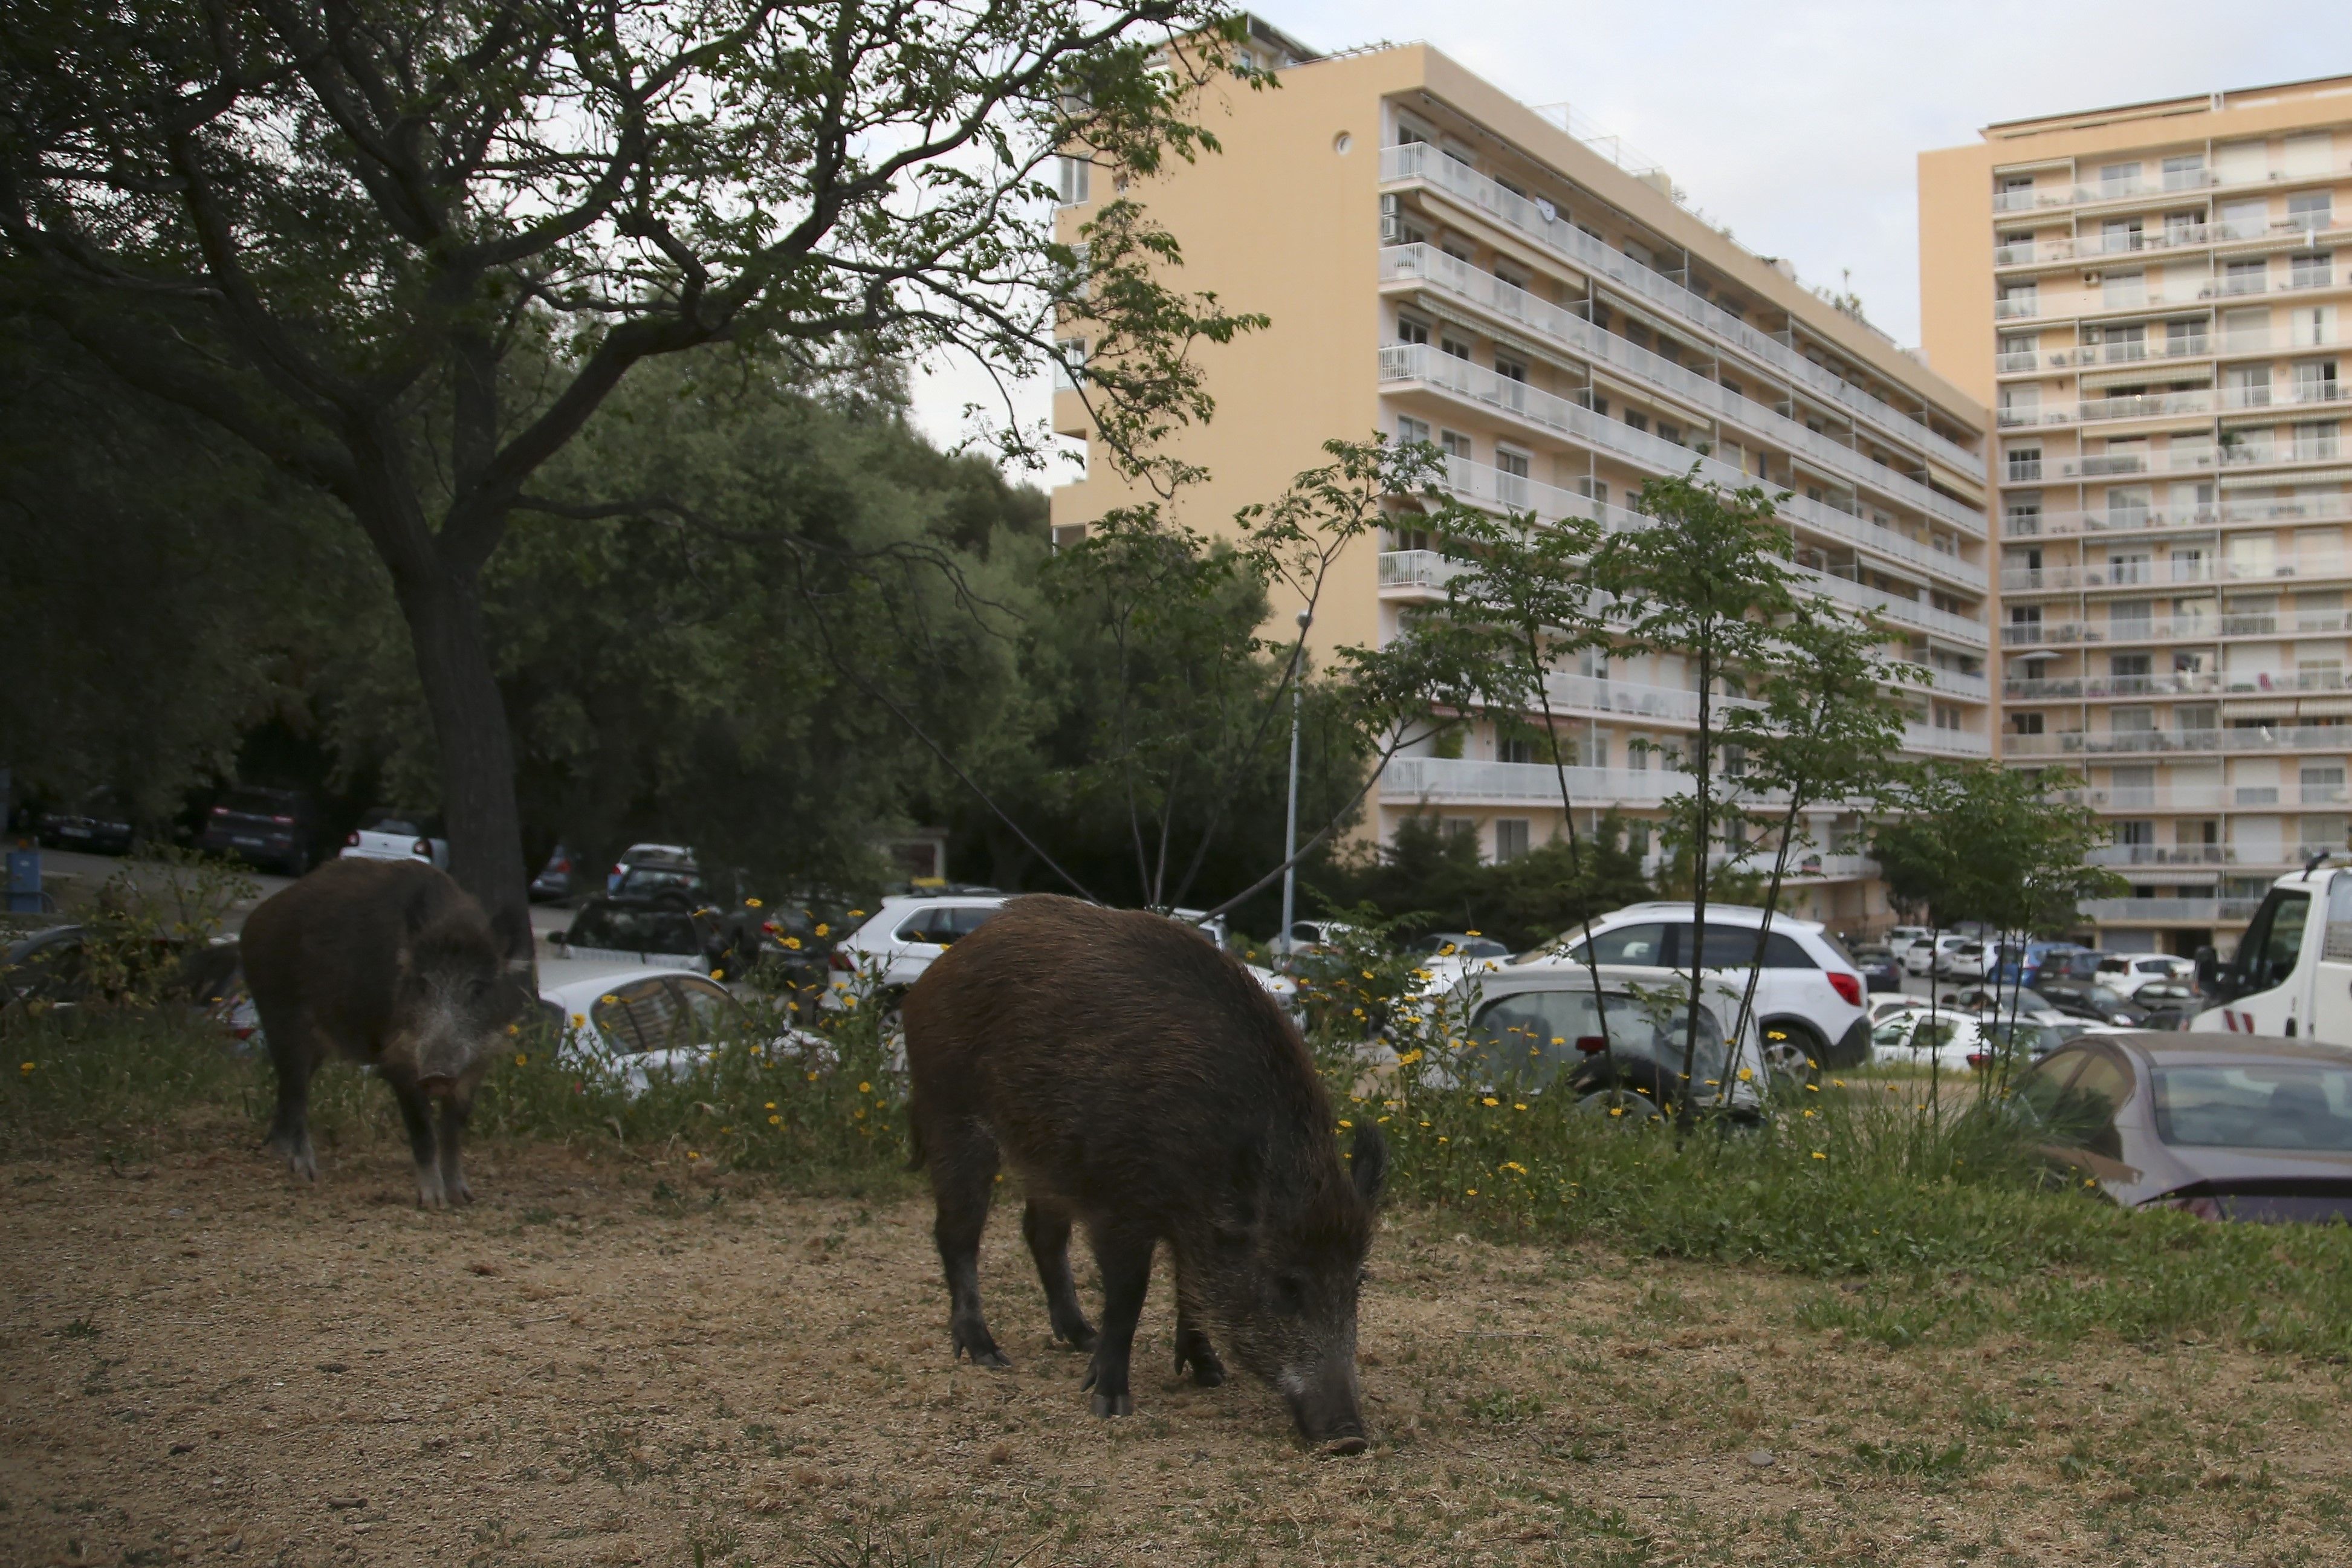 Wild boars eat the grass in a garden close to a residential buildings in Ajaccio, on the French Mediterranean island of Corsica